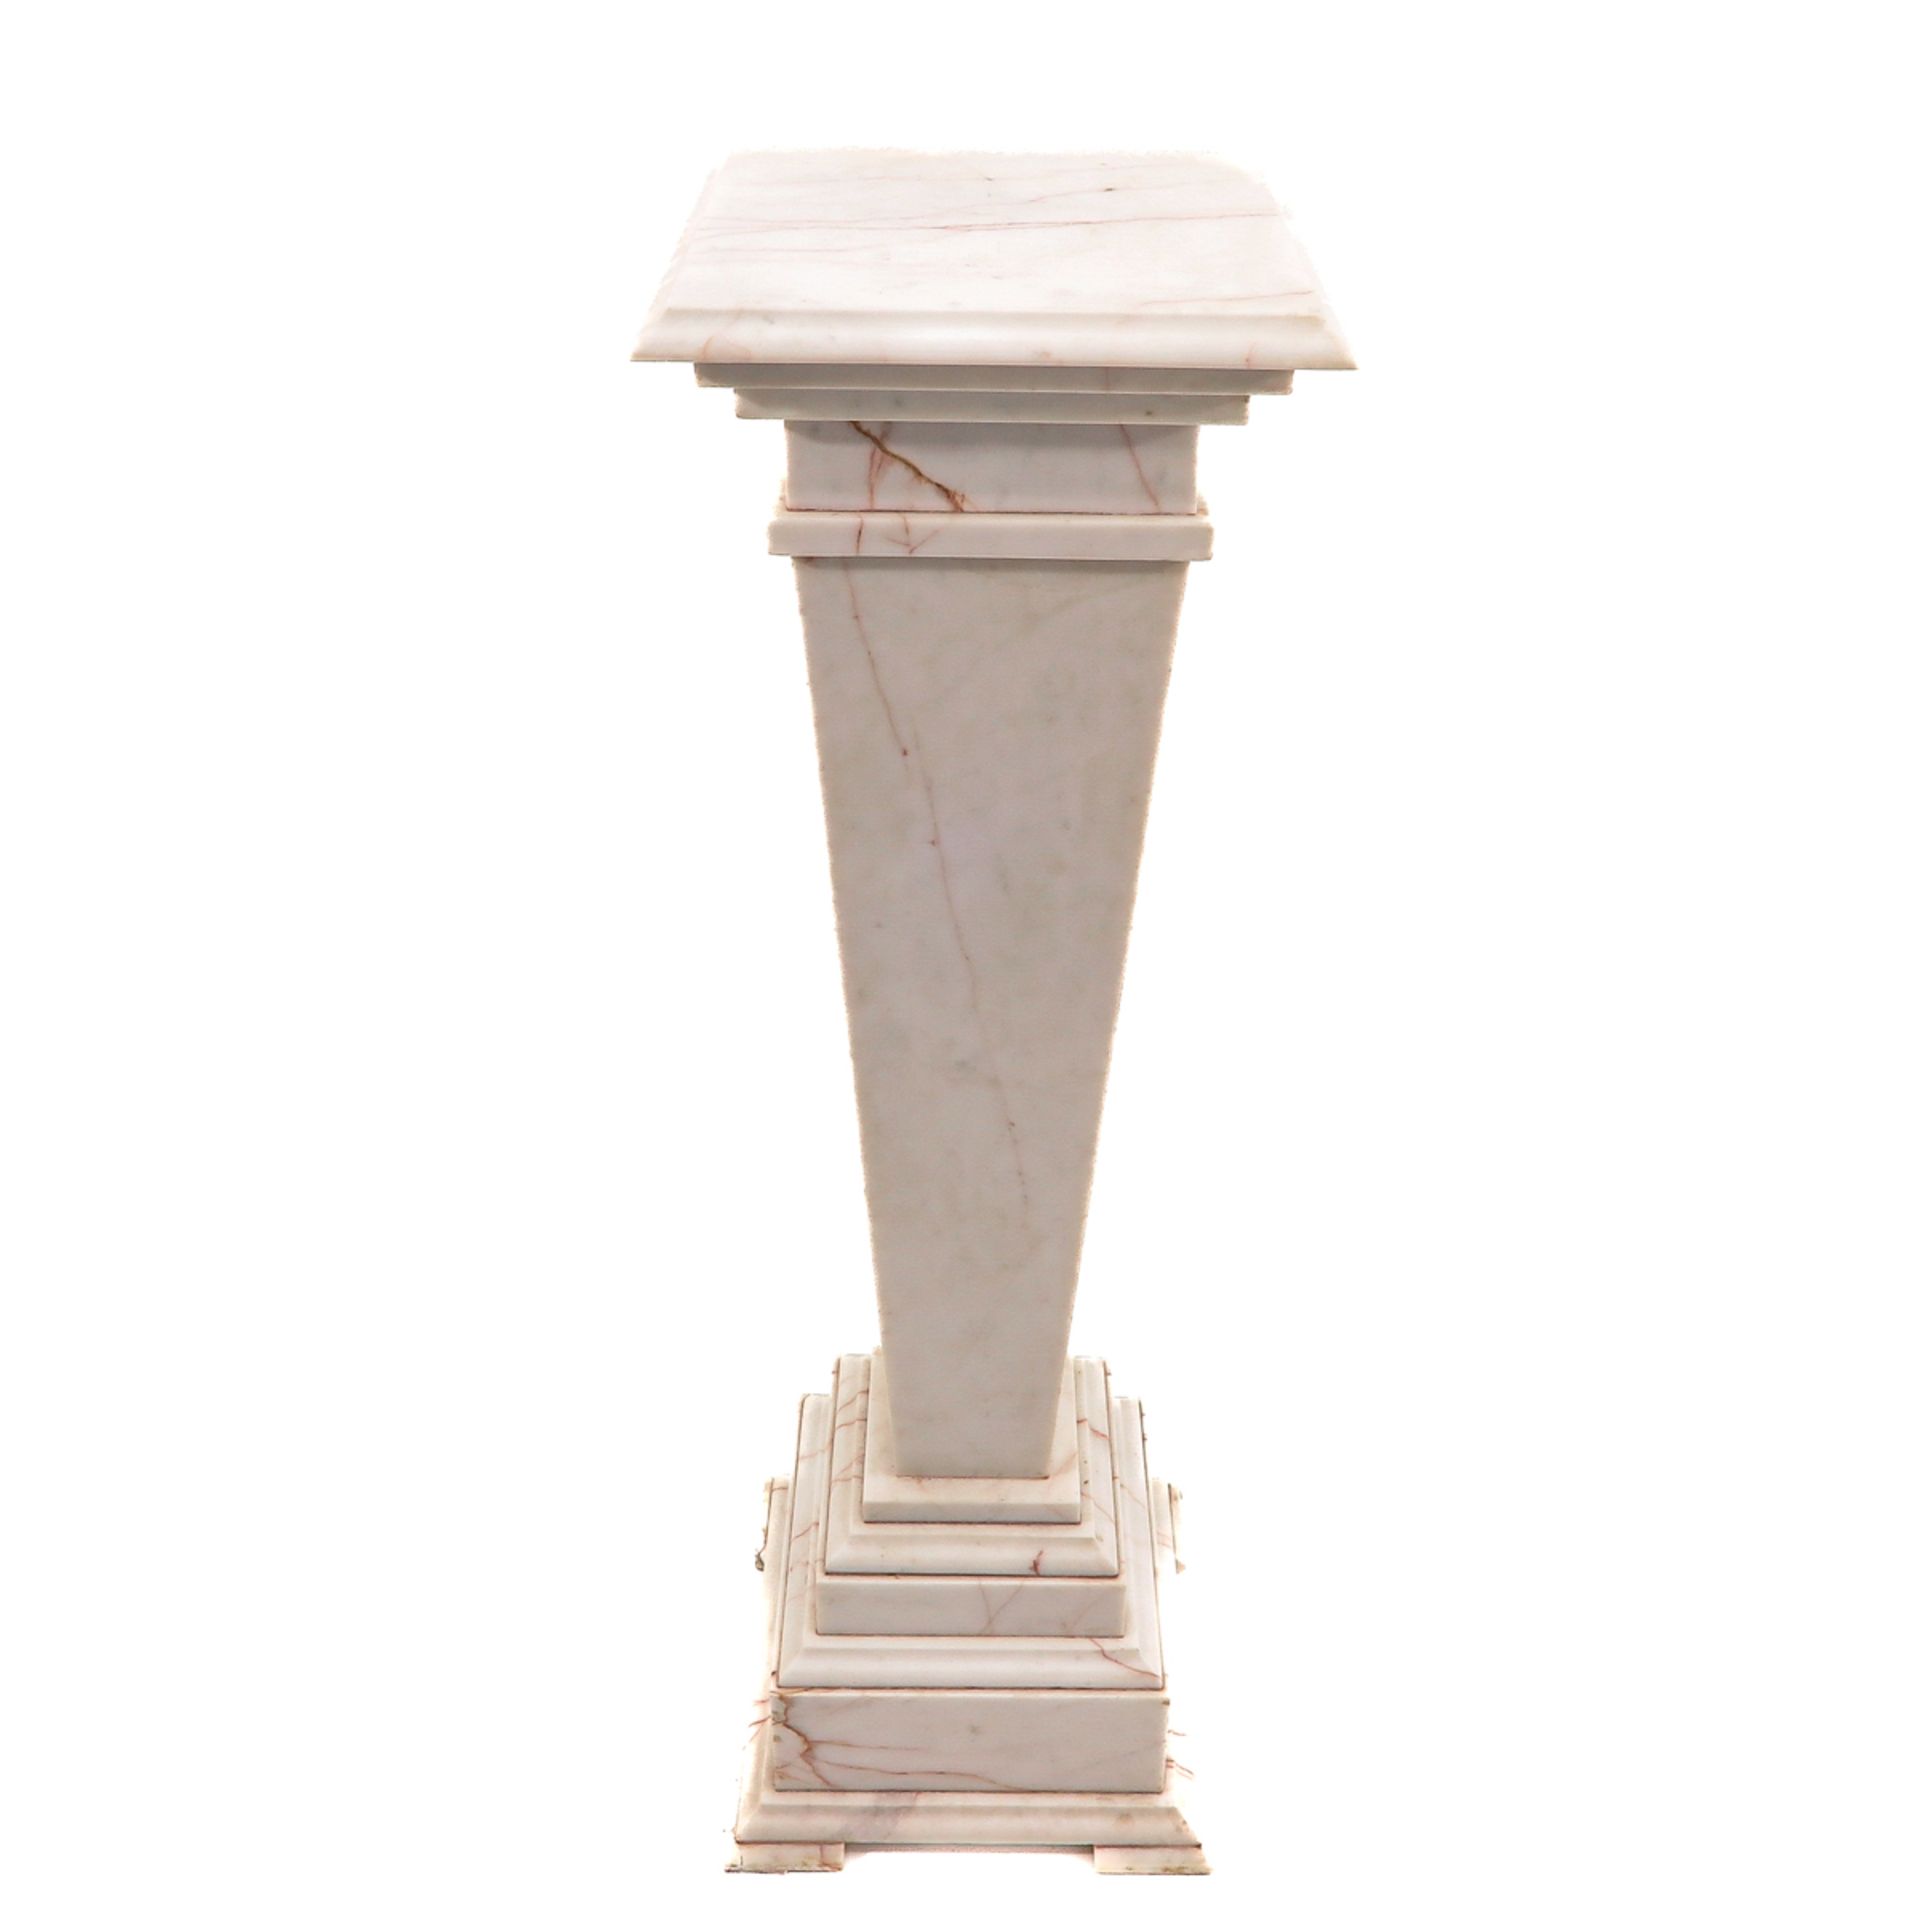 A Marble Pedestal - Image 6 of 8